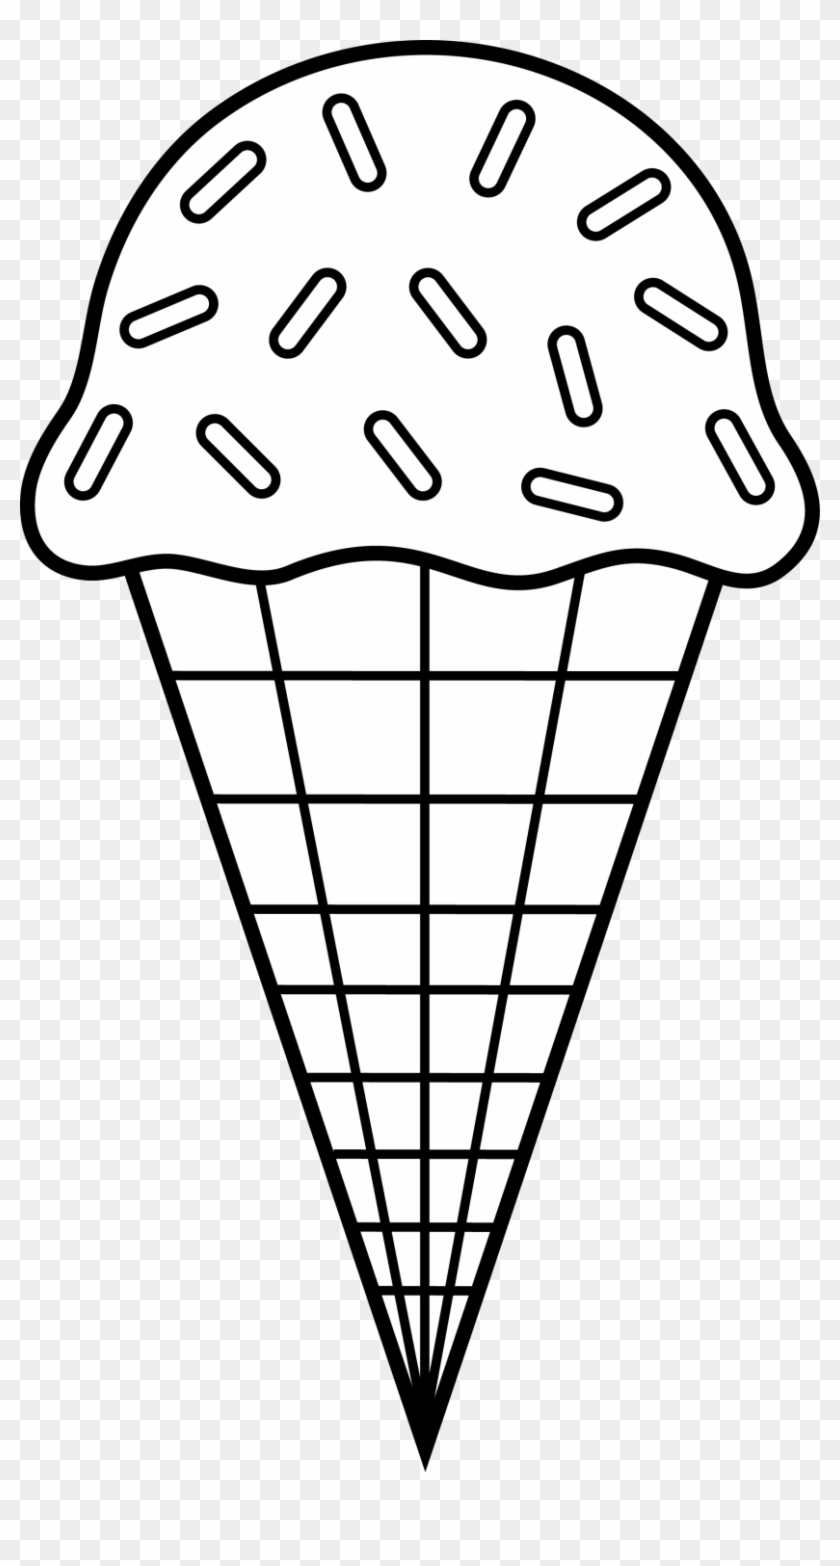 Ice Cream Black And White Clipart Black And White Ice Ice Cream Coloring Pages Free Transparent Png Clipart Images Download